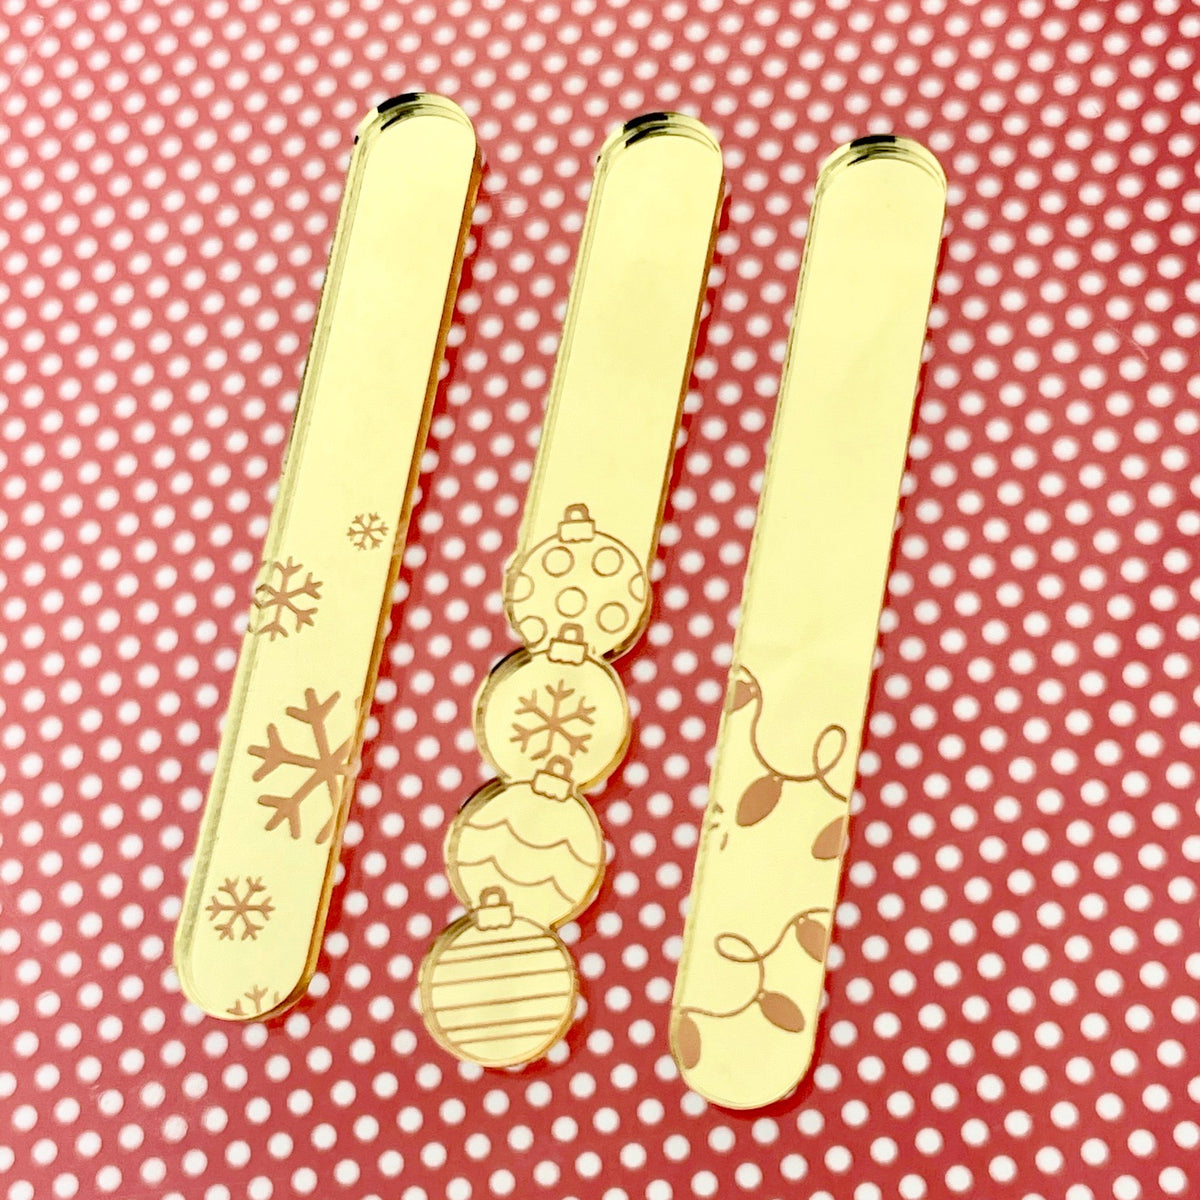 Christmas Novelty Acrylic Cakesicle Popsicle Sticks in Mini and Standa –  Occasional Paper Cuts